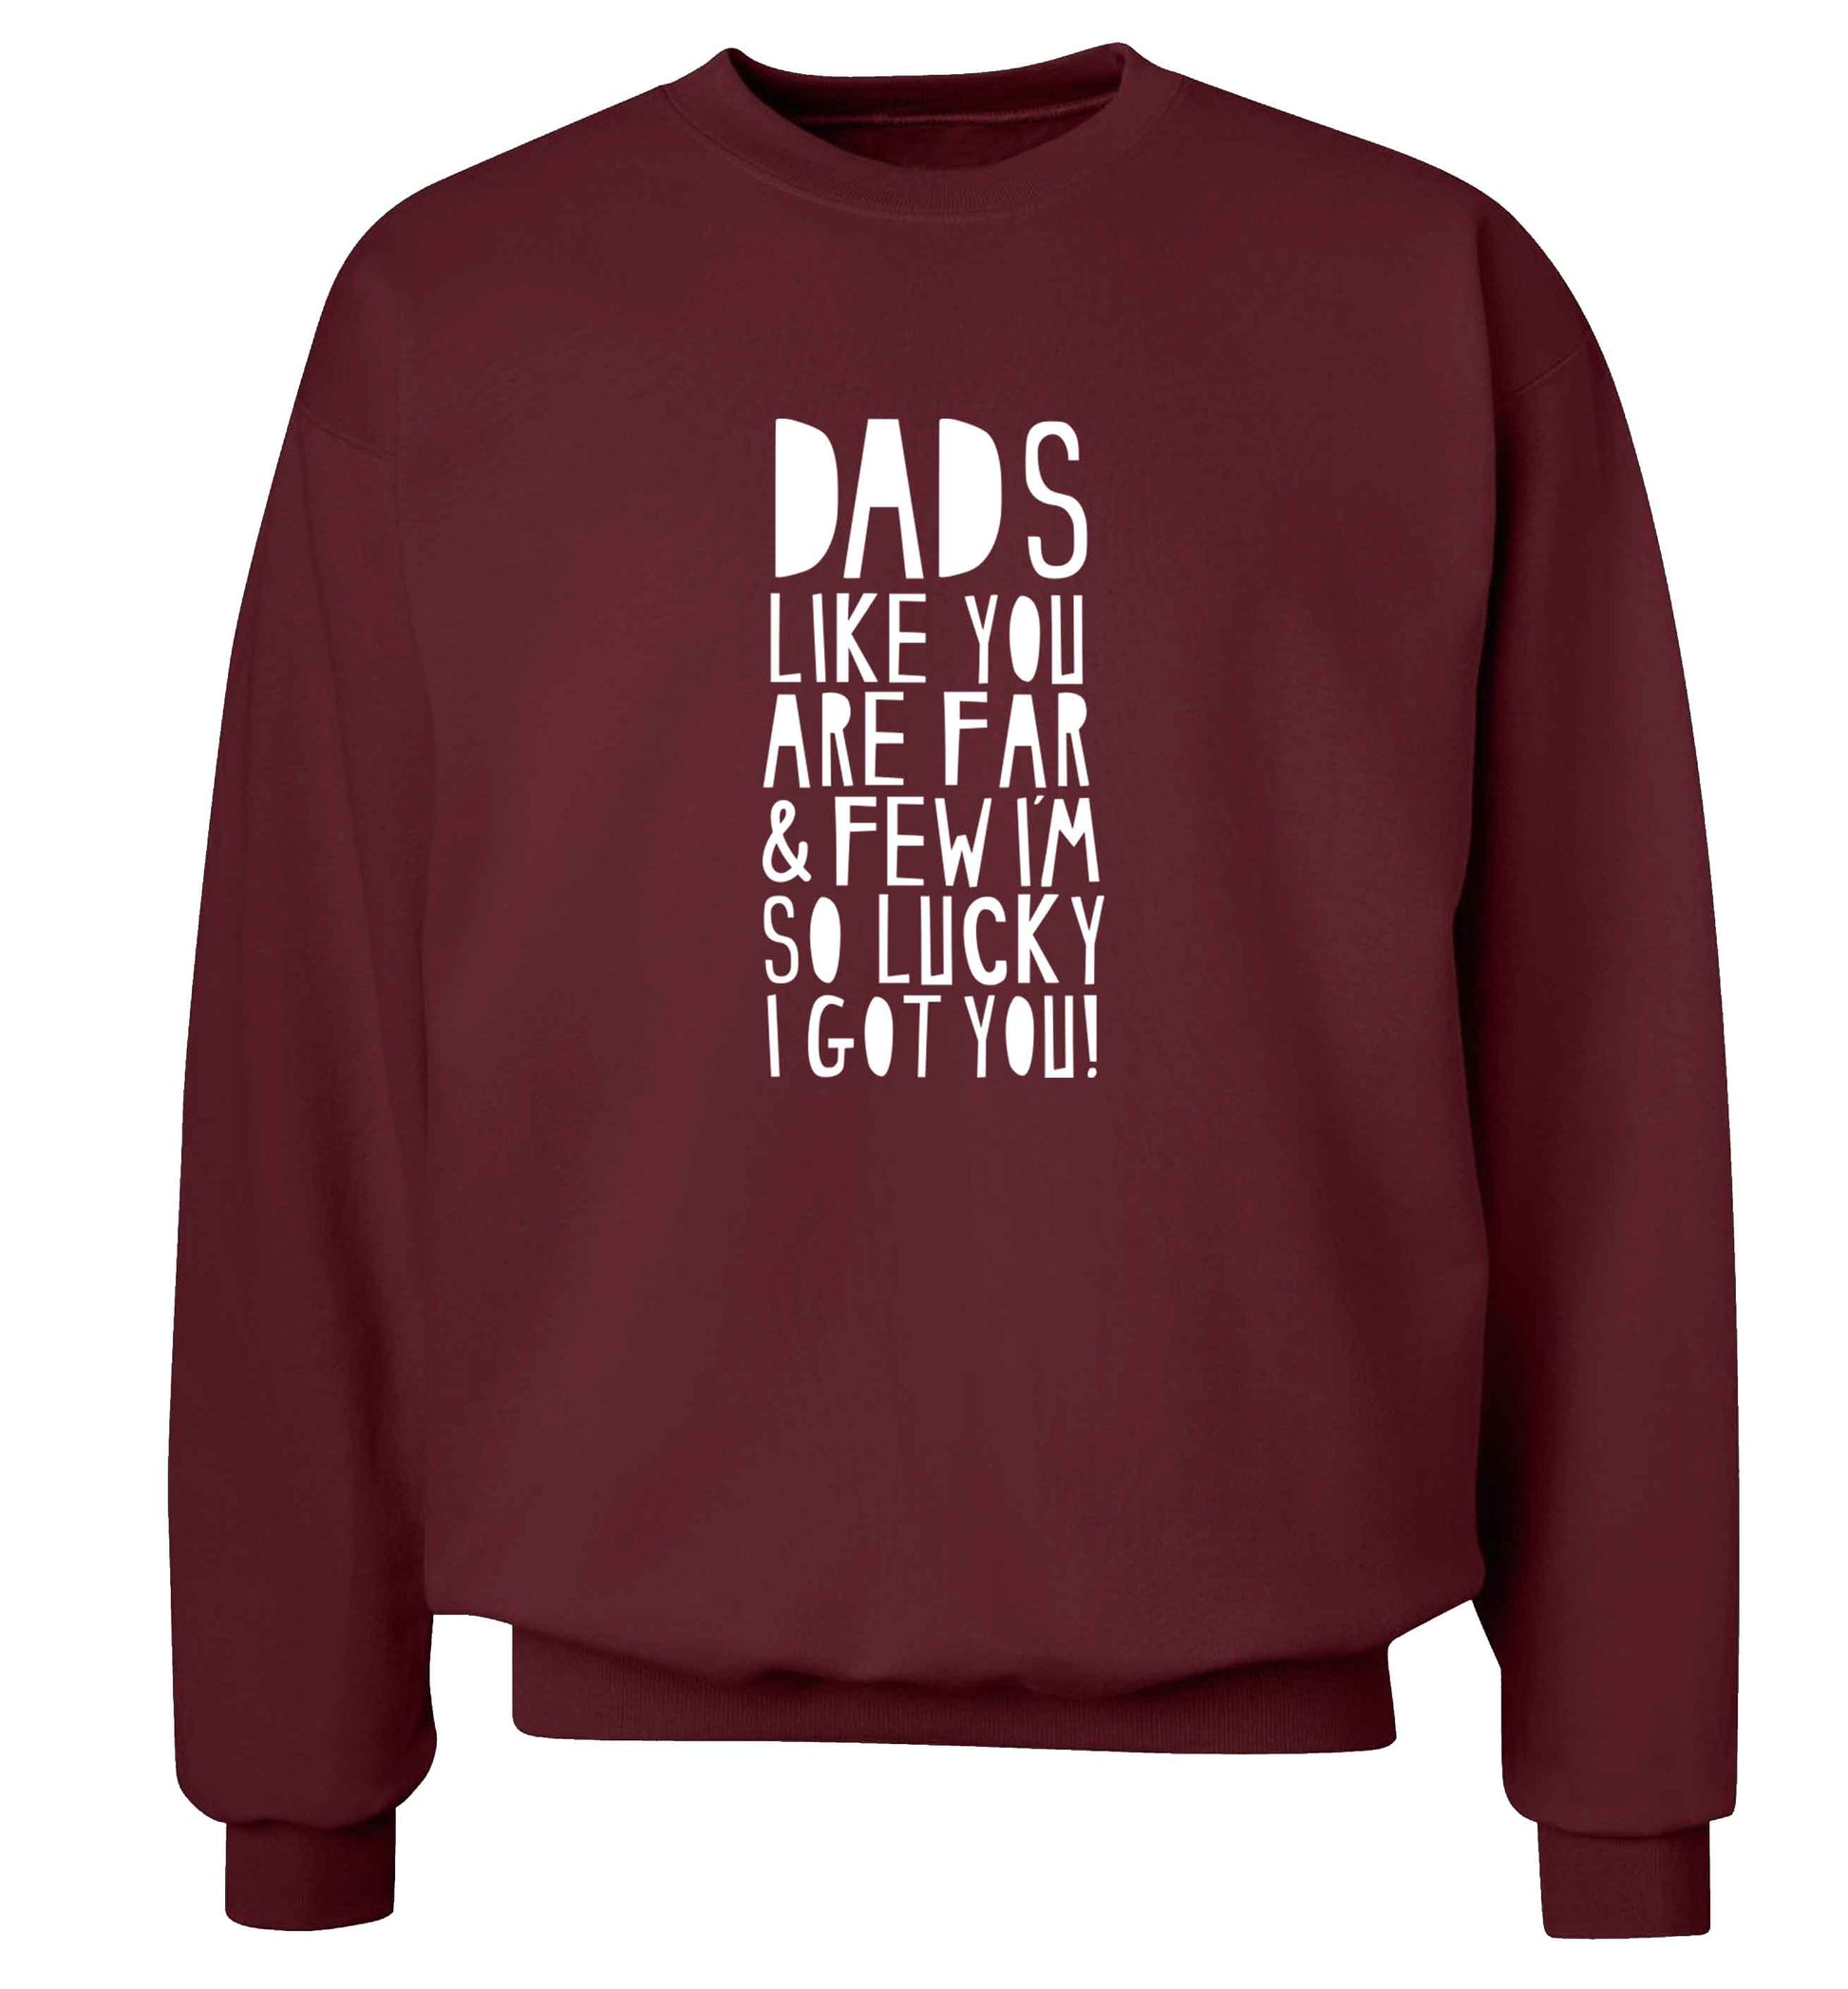 Dads like you are far and few I'm so luck I got you! adult's unisex maroon sweater 2XL